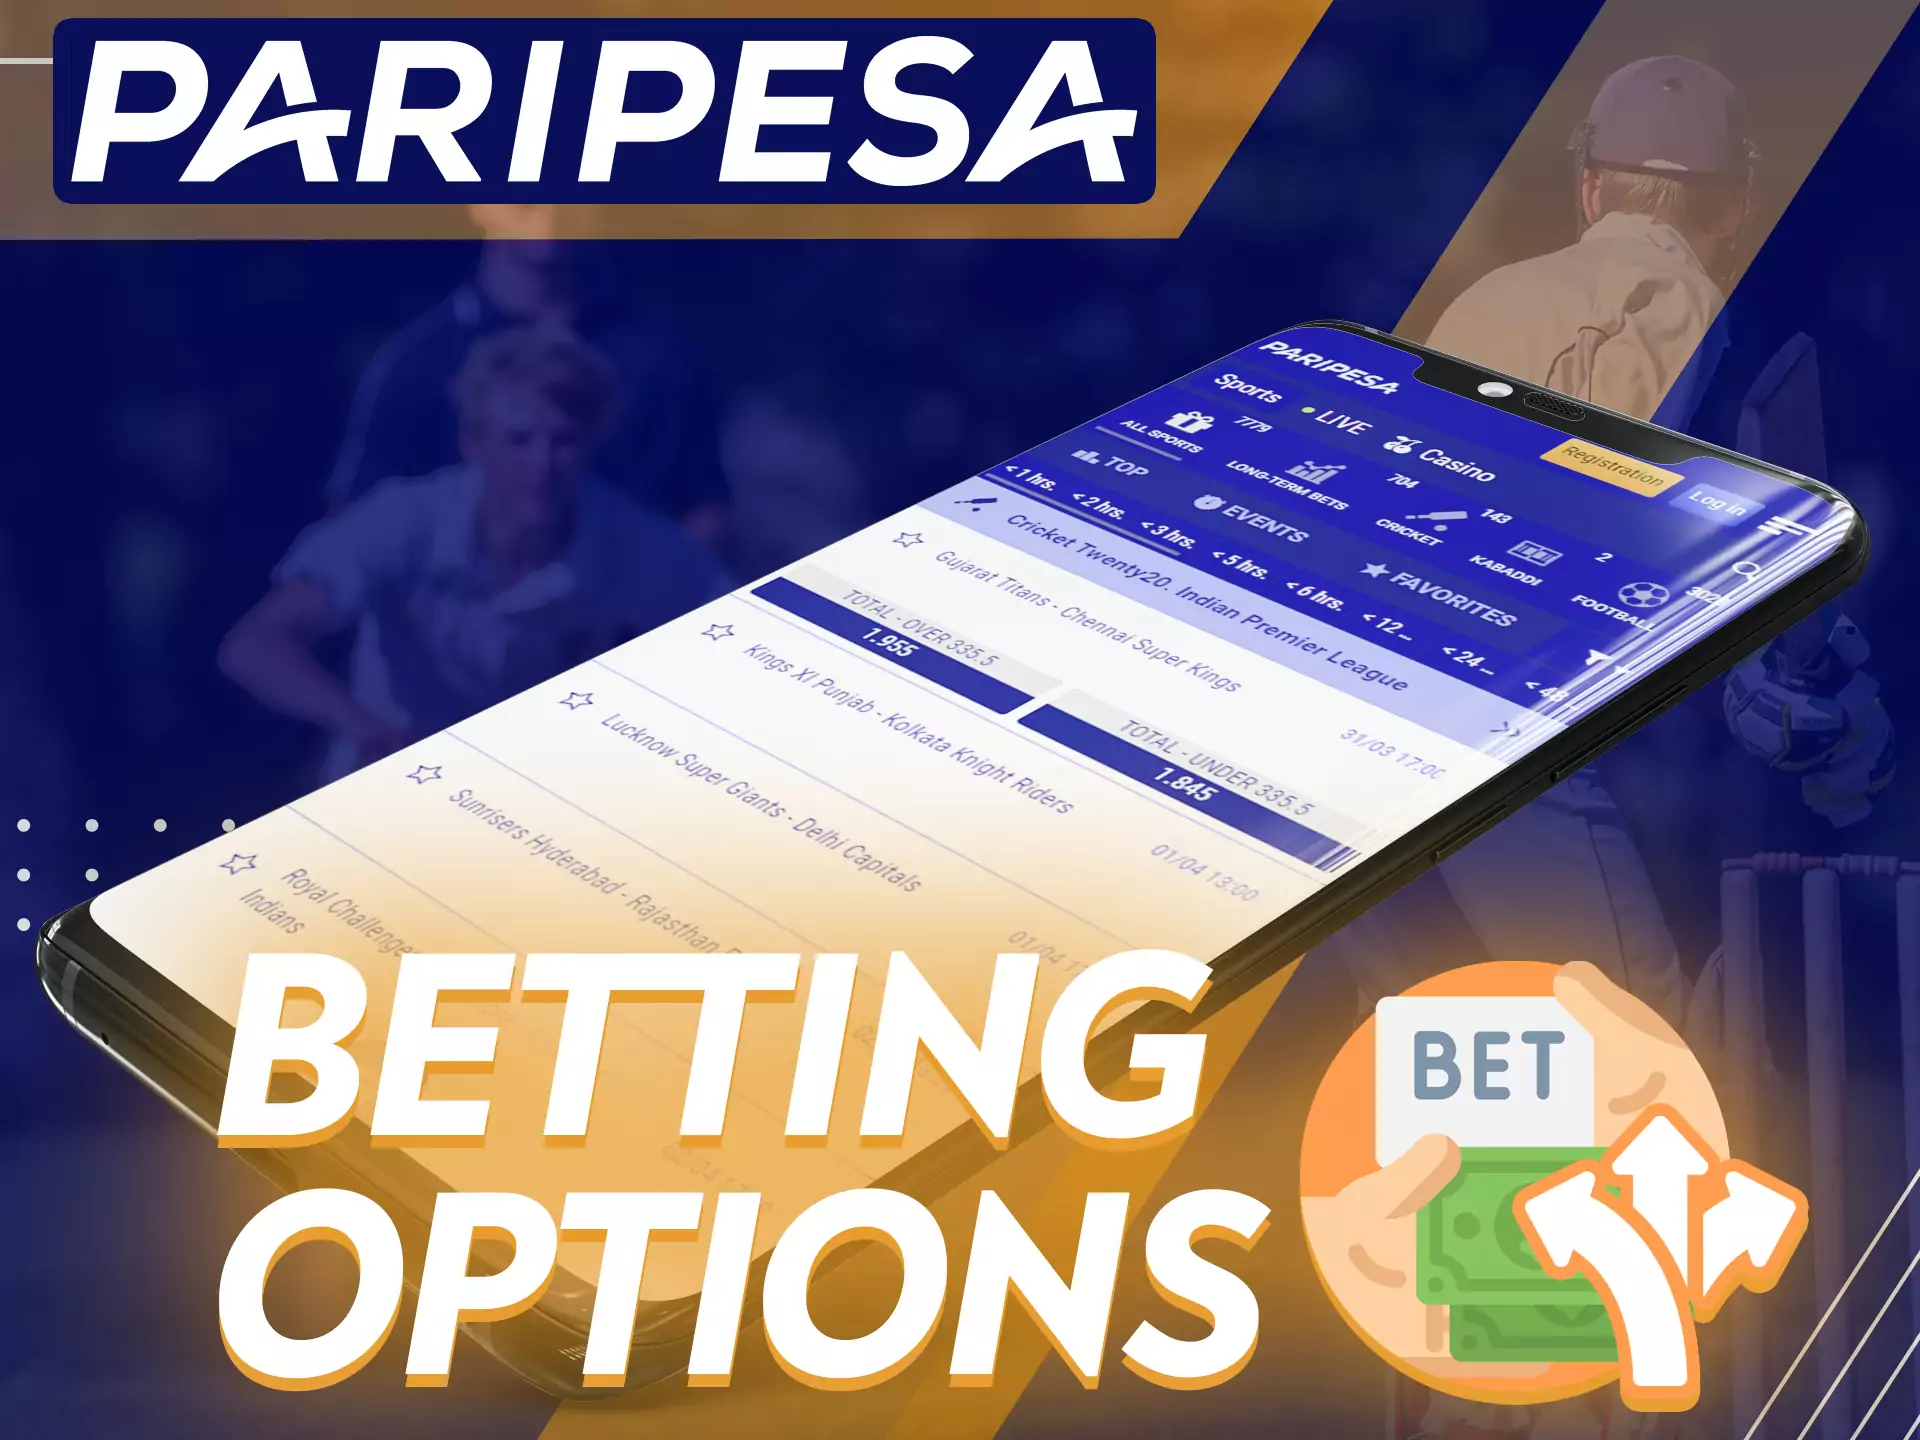 The Paripesa app has various options for sports betting.